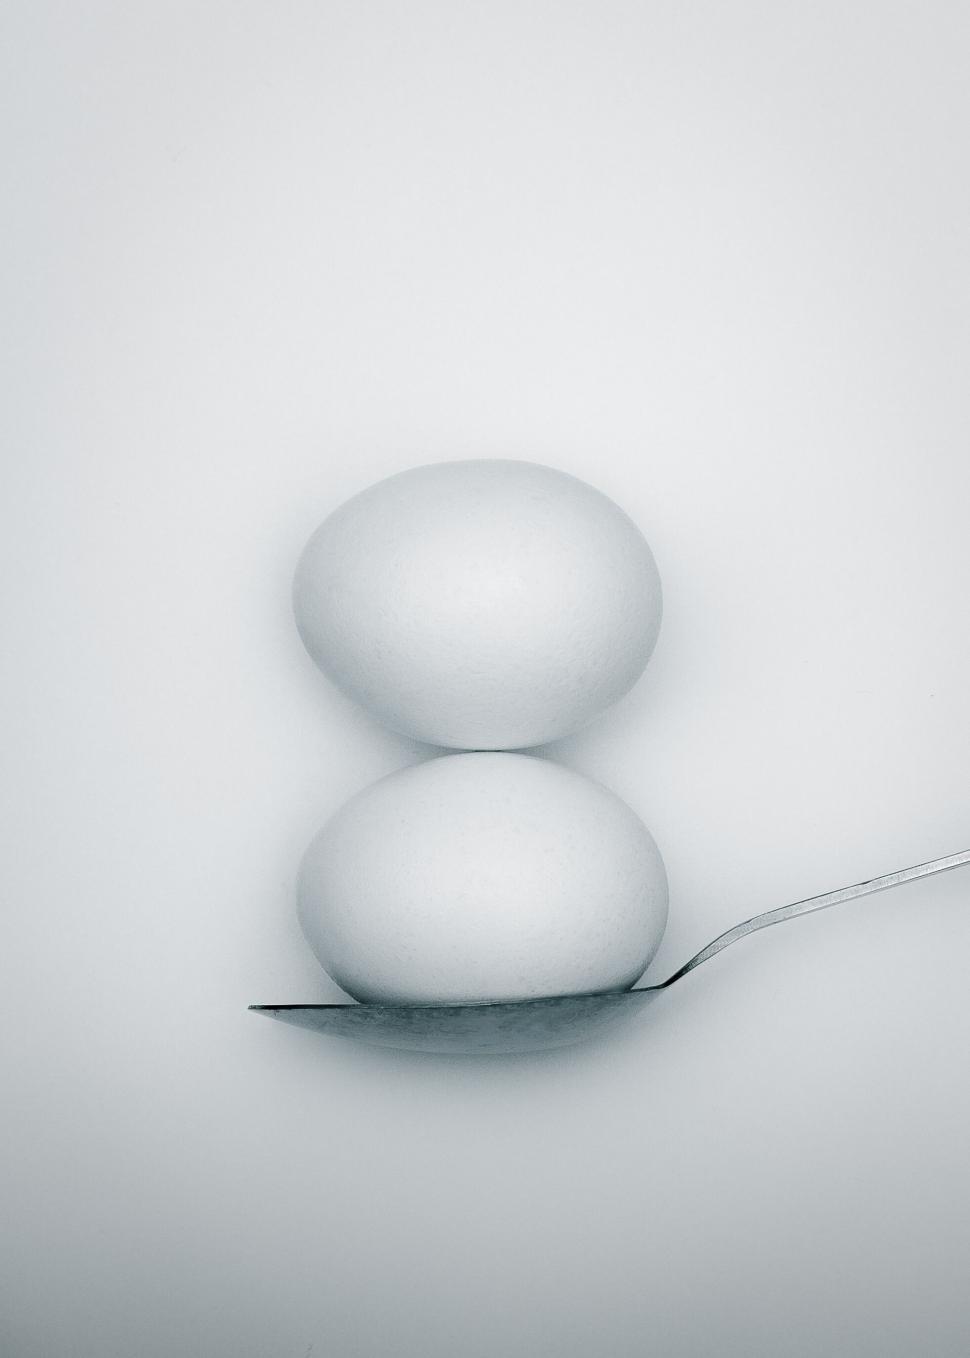 Free Image of Two eggs balanced on a spoon in white space 